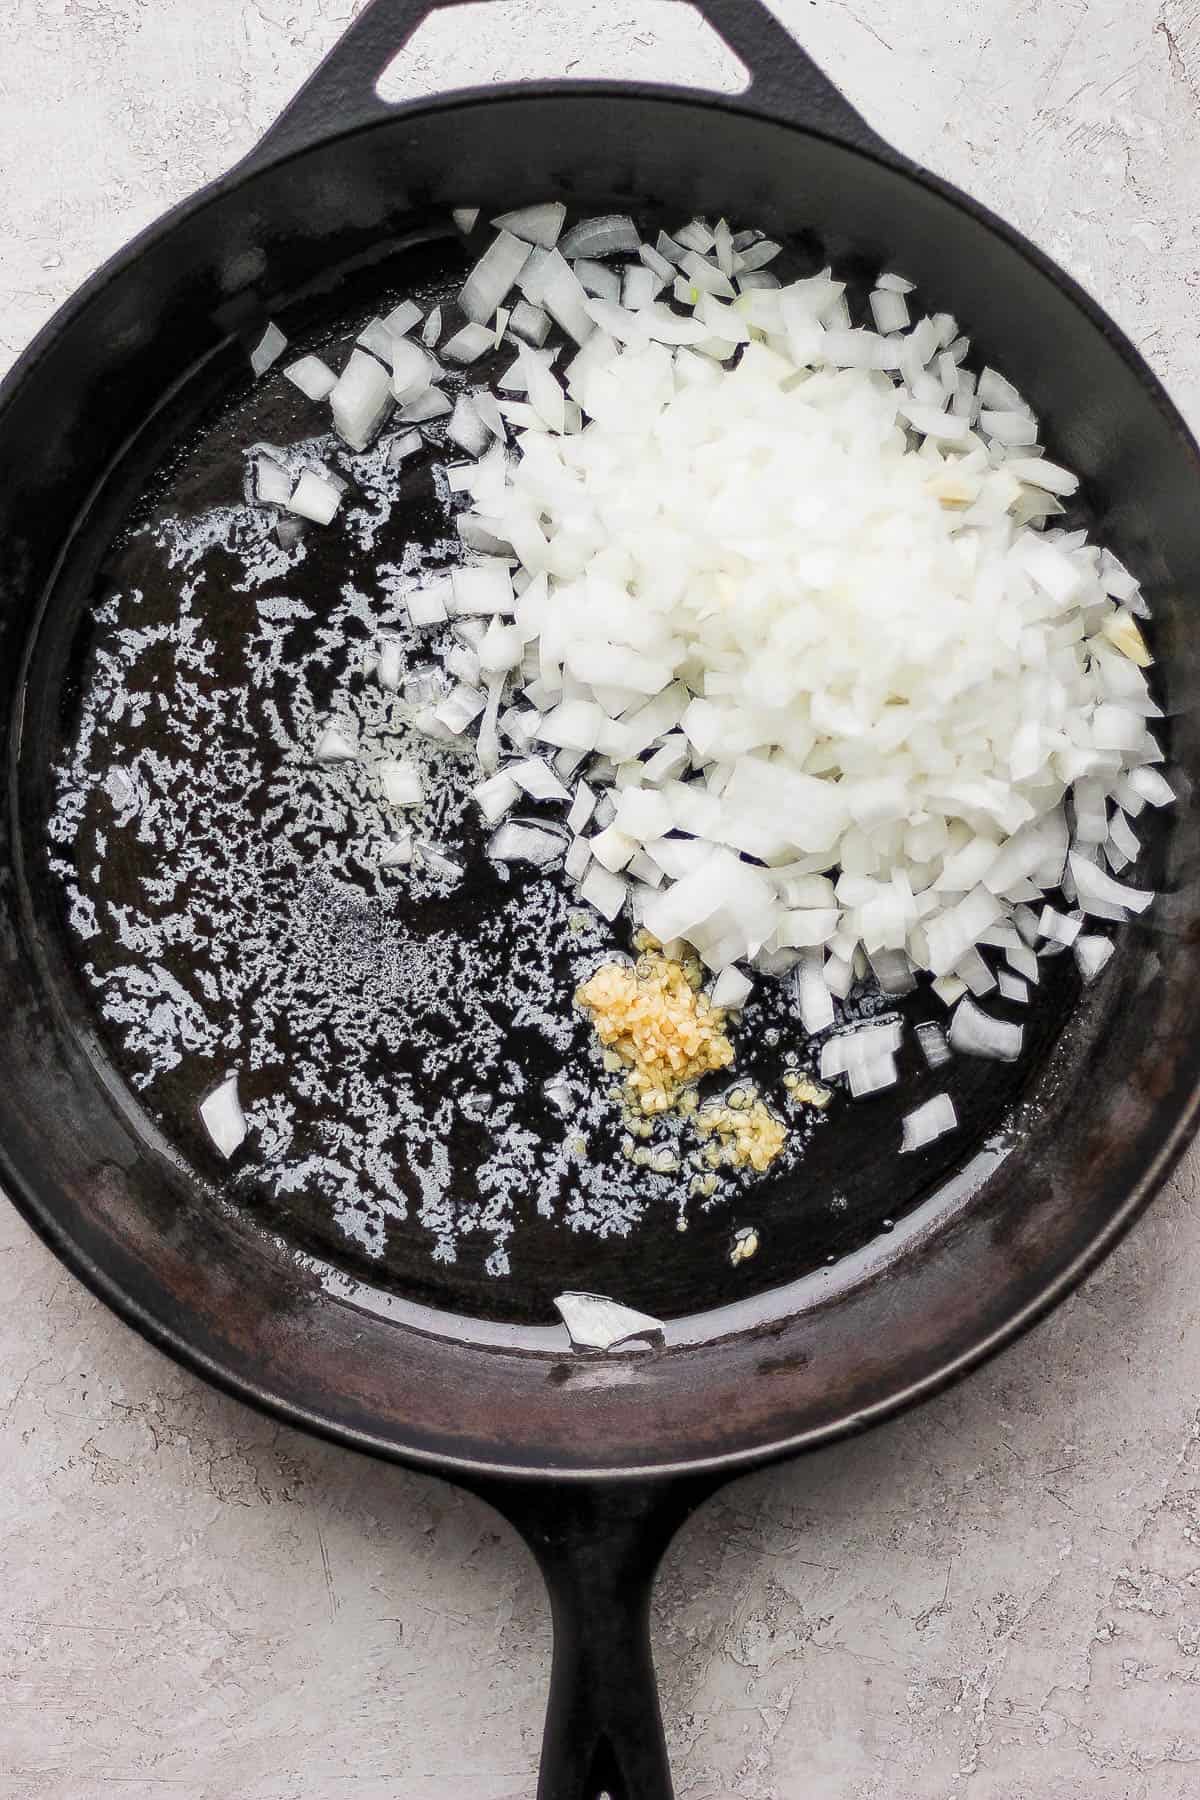 Melted butter, minced garlic, and diced onion in a cast iron skillet.